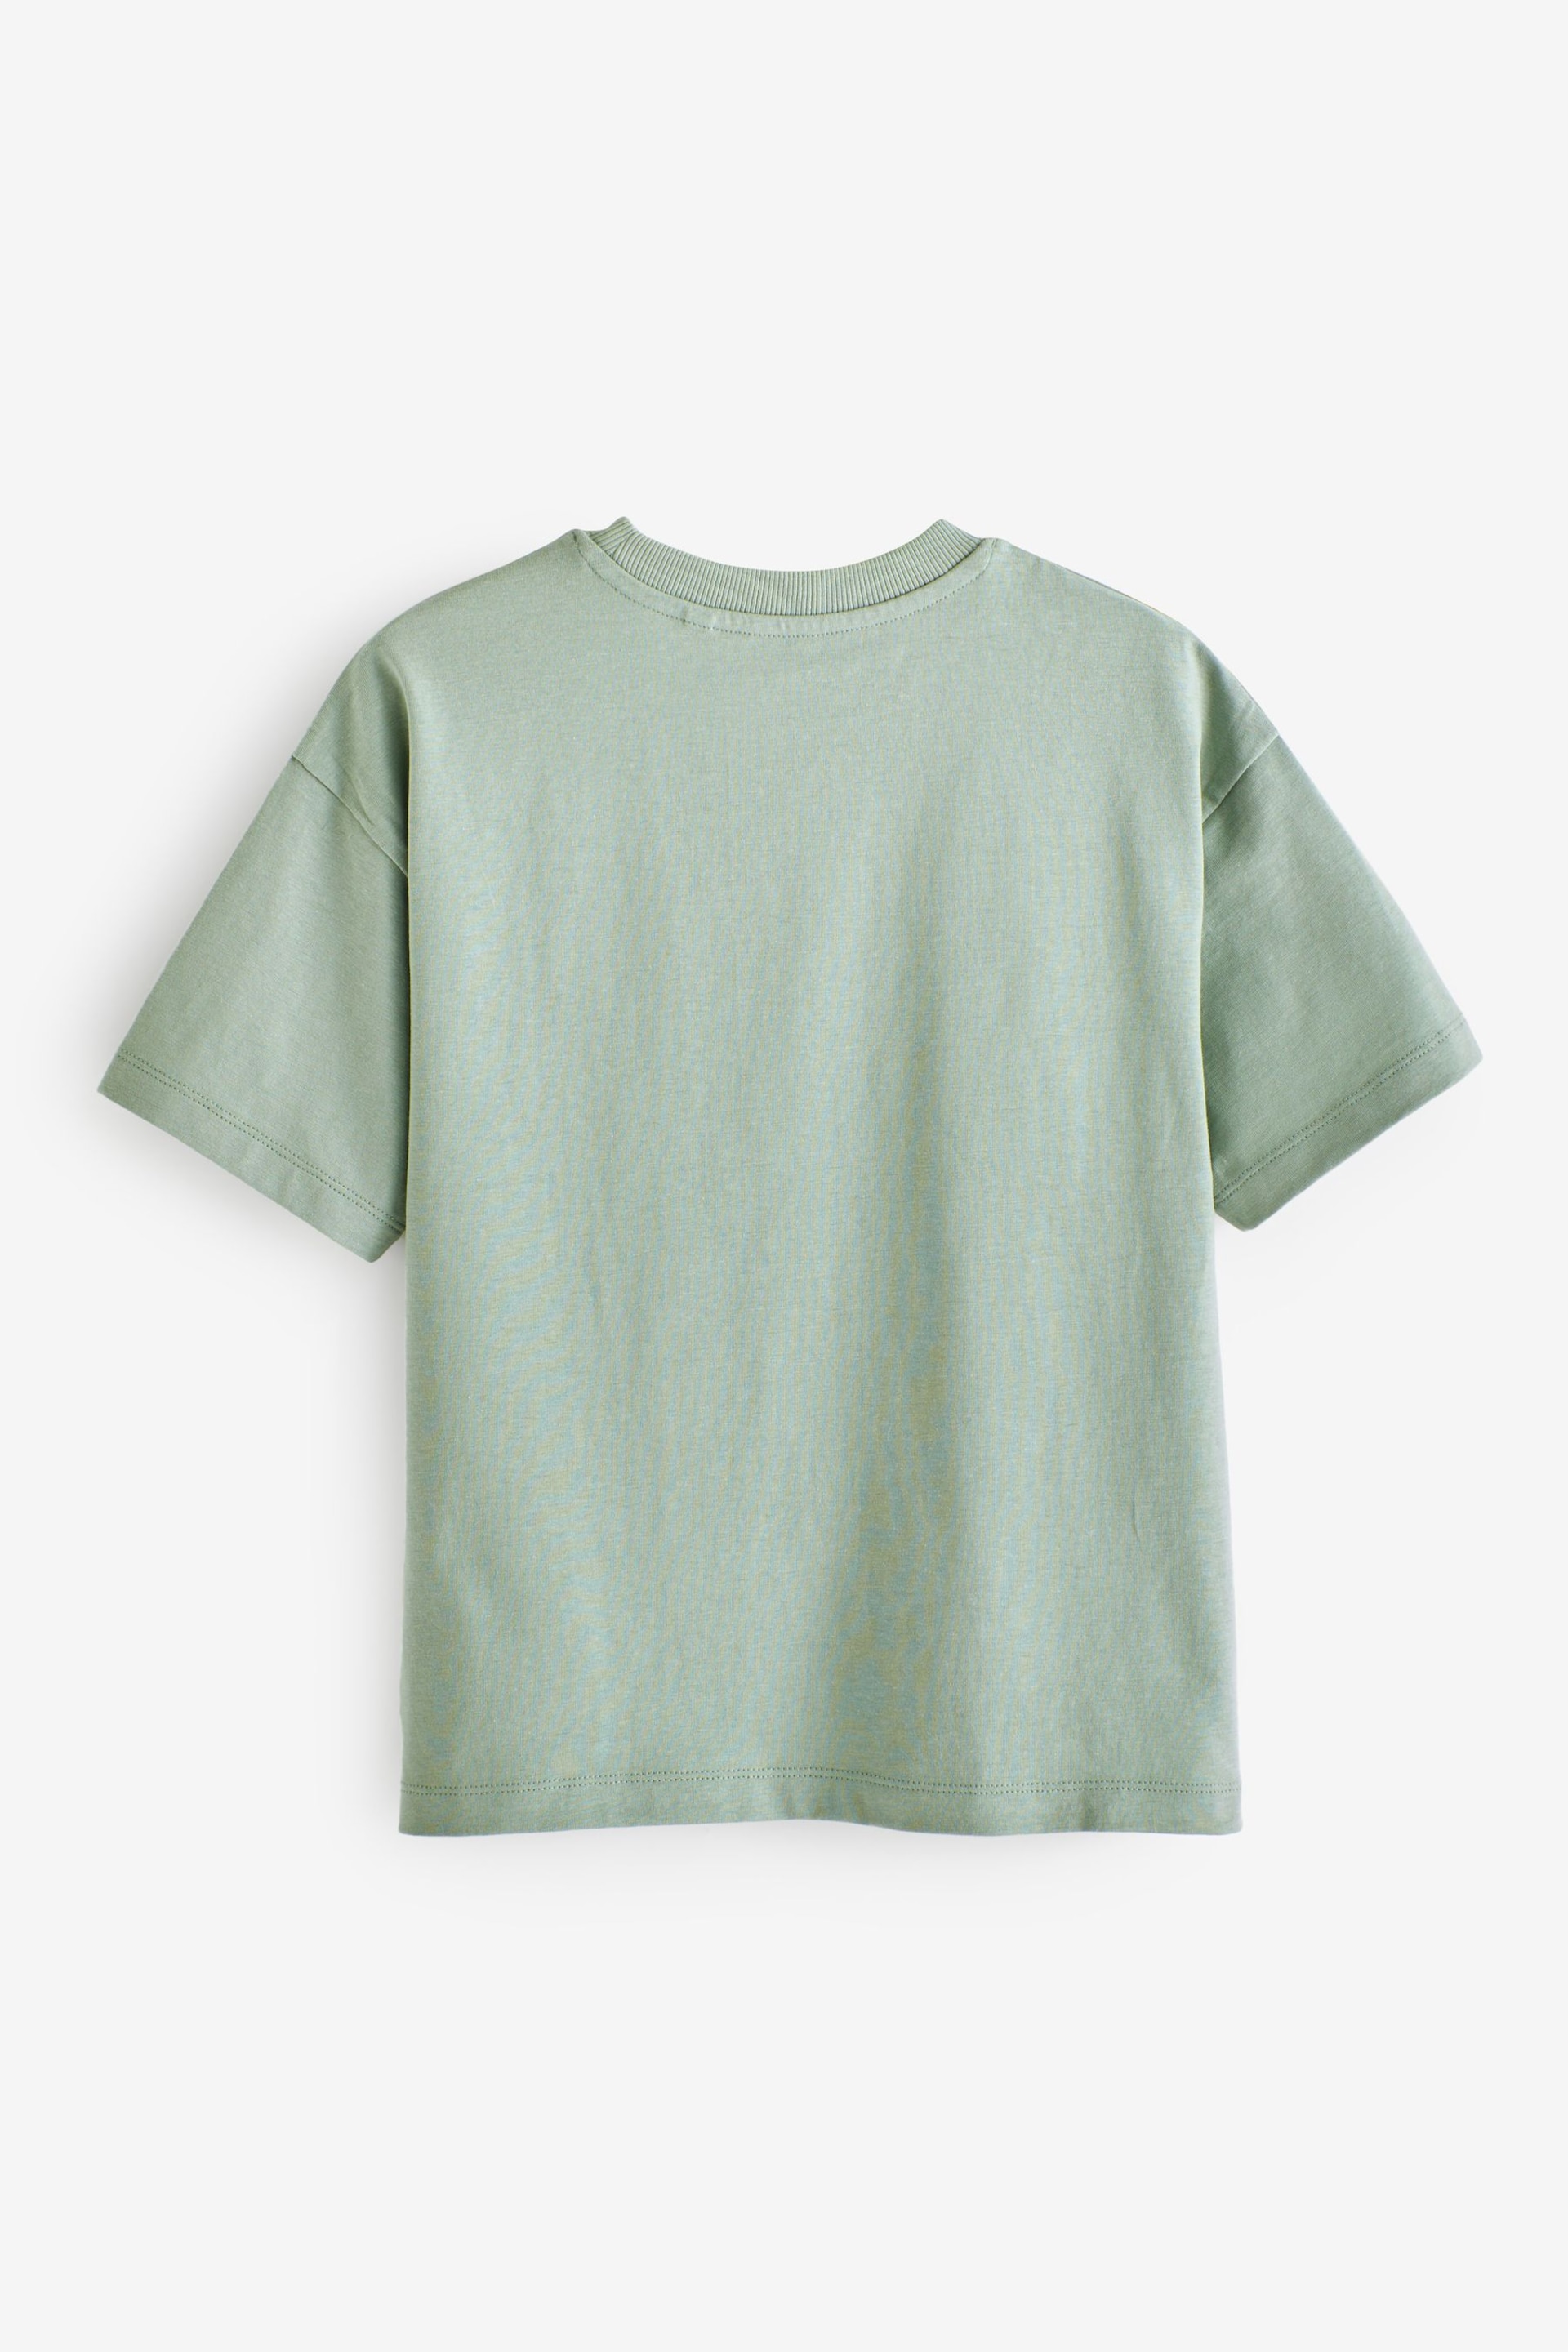 Green Mineral Relaxed Cotton Short Sleeve T-Shirt (3-16yrs) - Image 4 of 5